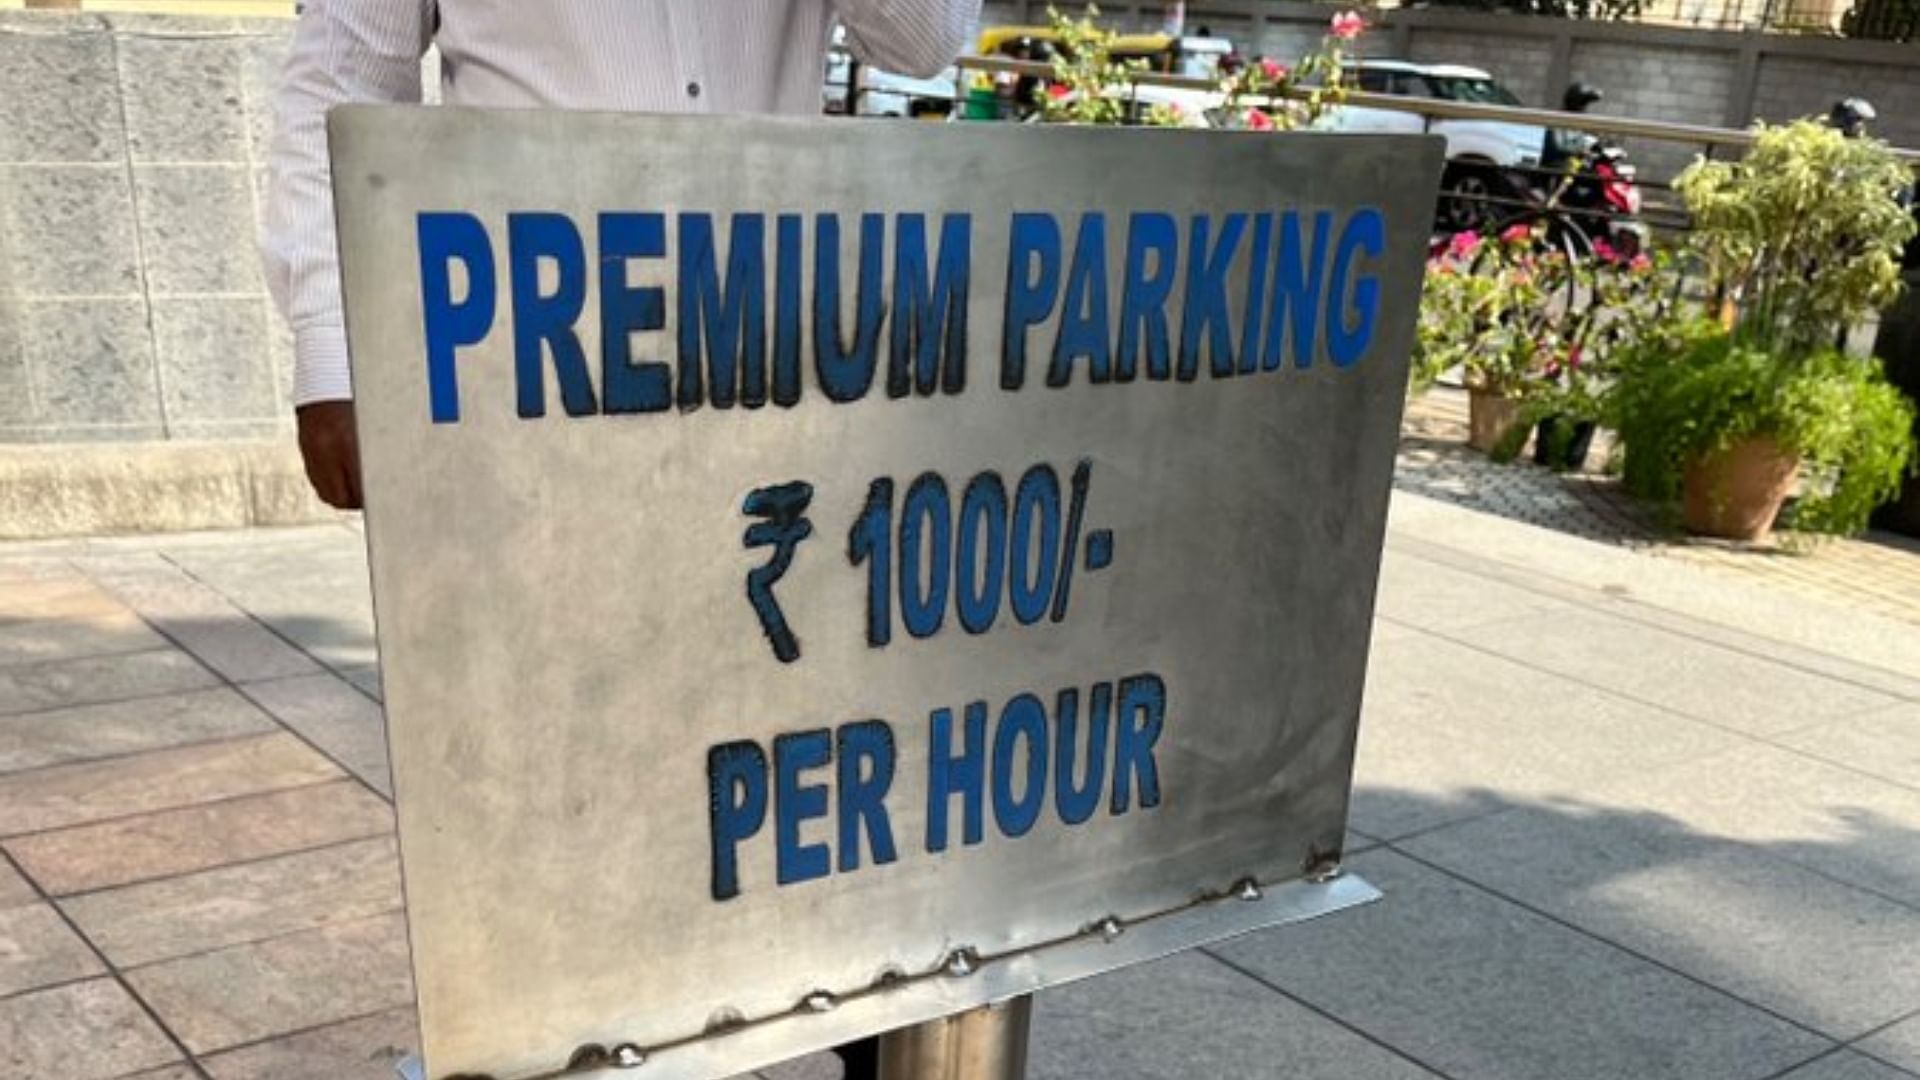 This Mall In Bengaluru India Charges 1000 Per Hour Pic Of Parking Went Viral